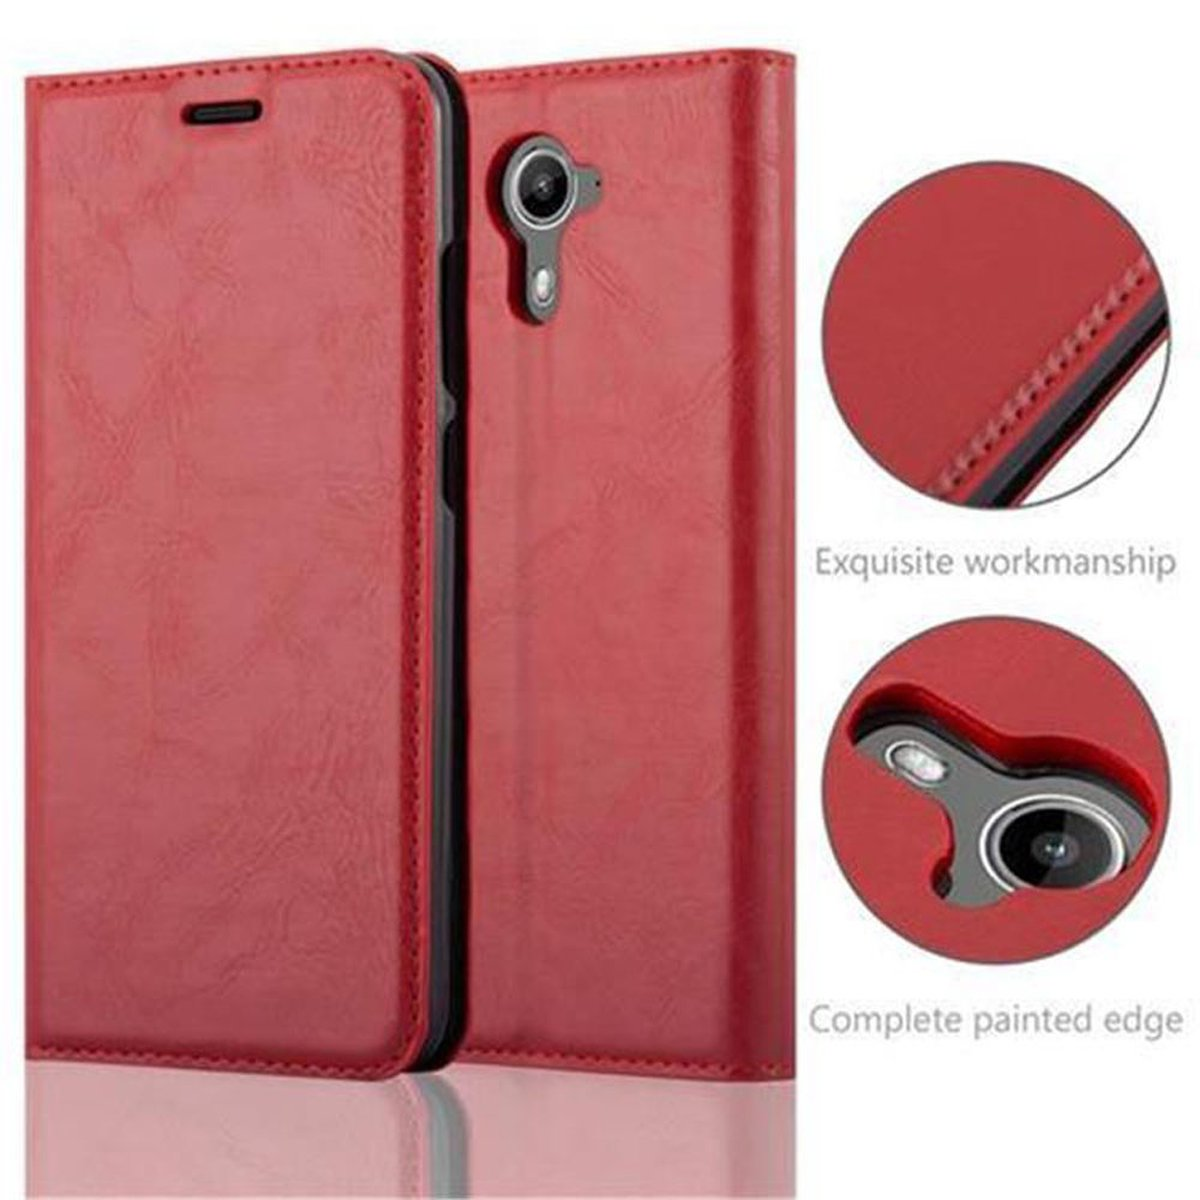 Book APFEL U ROT PRIME, FEEL Magnet, Invisible CADORABO Bookcover, WIKO, Hülle